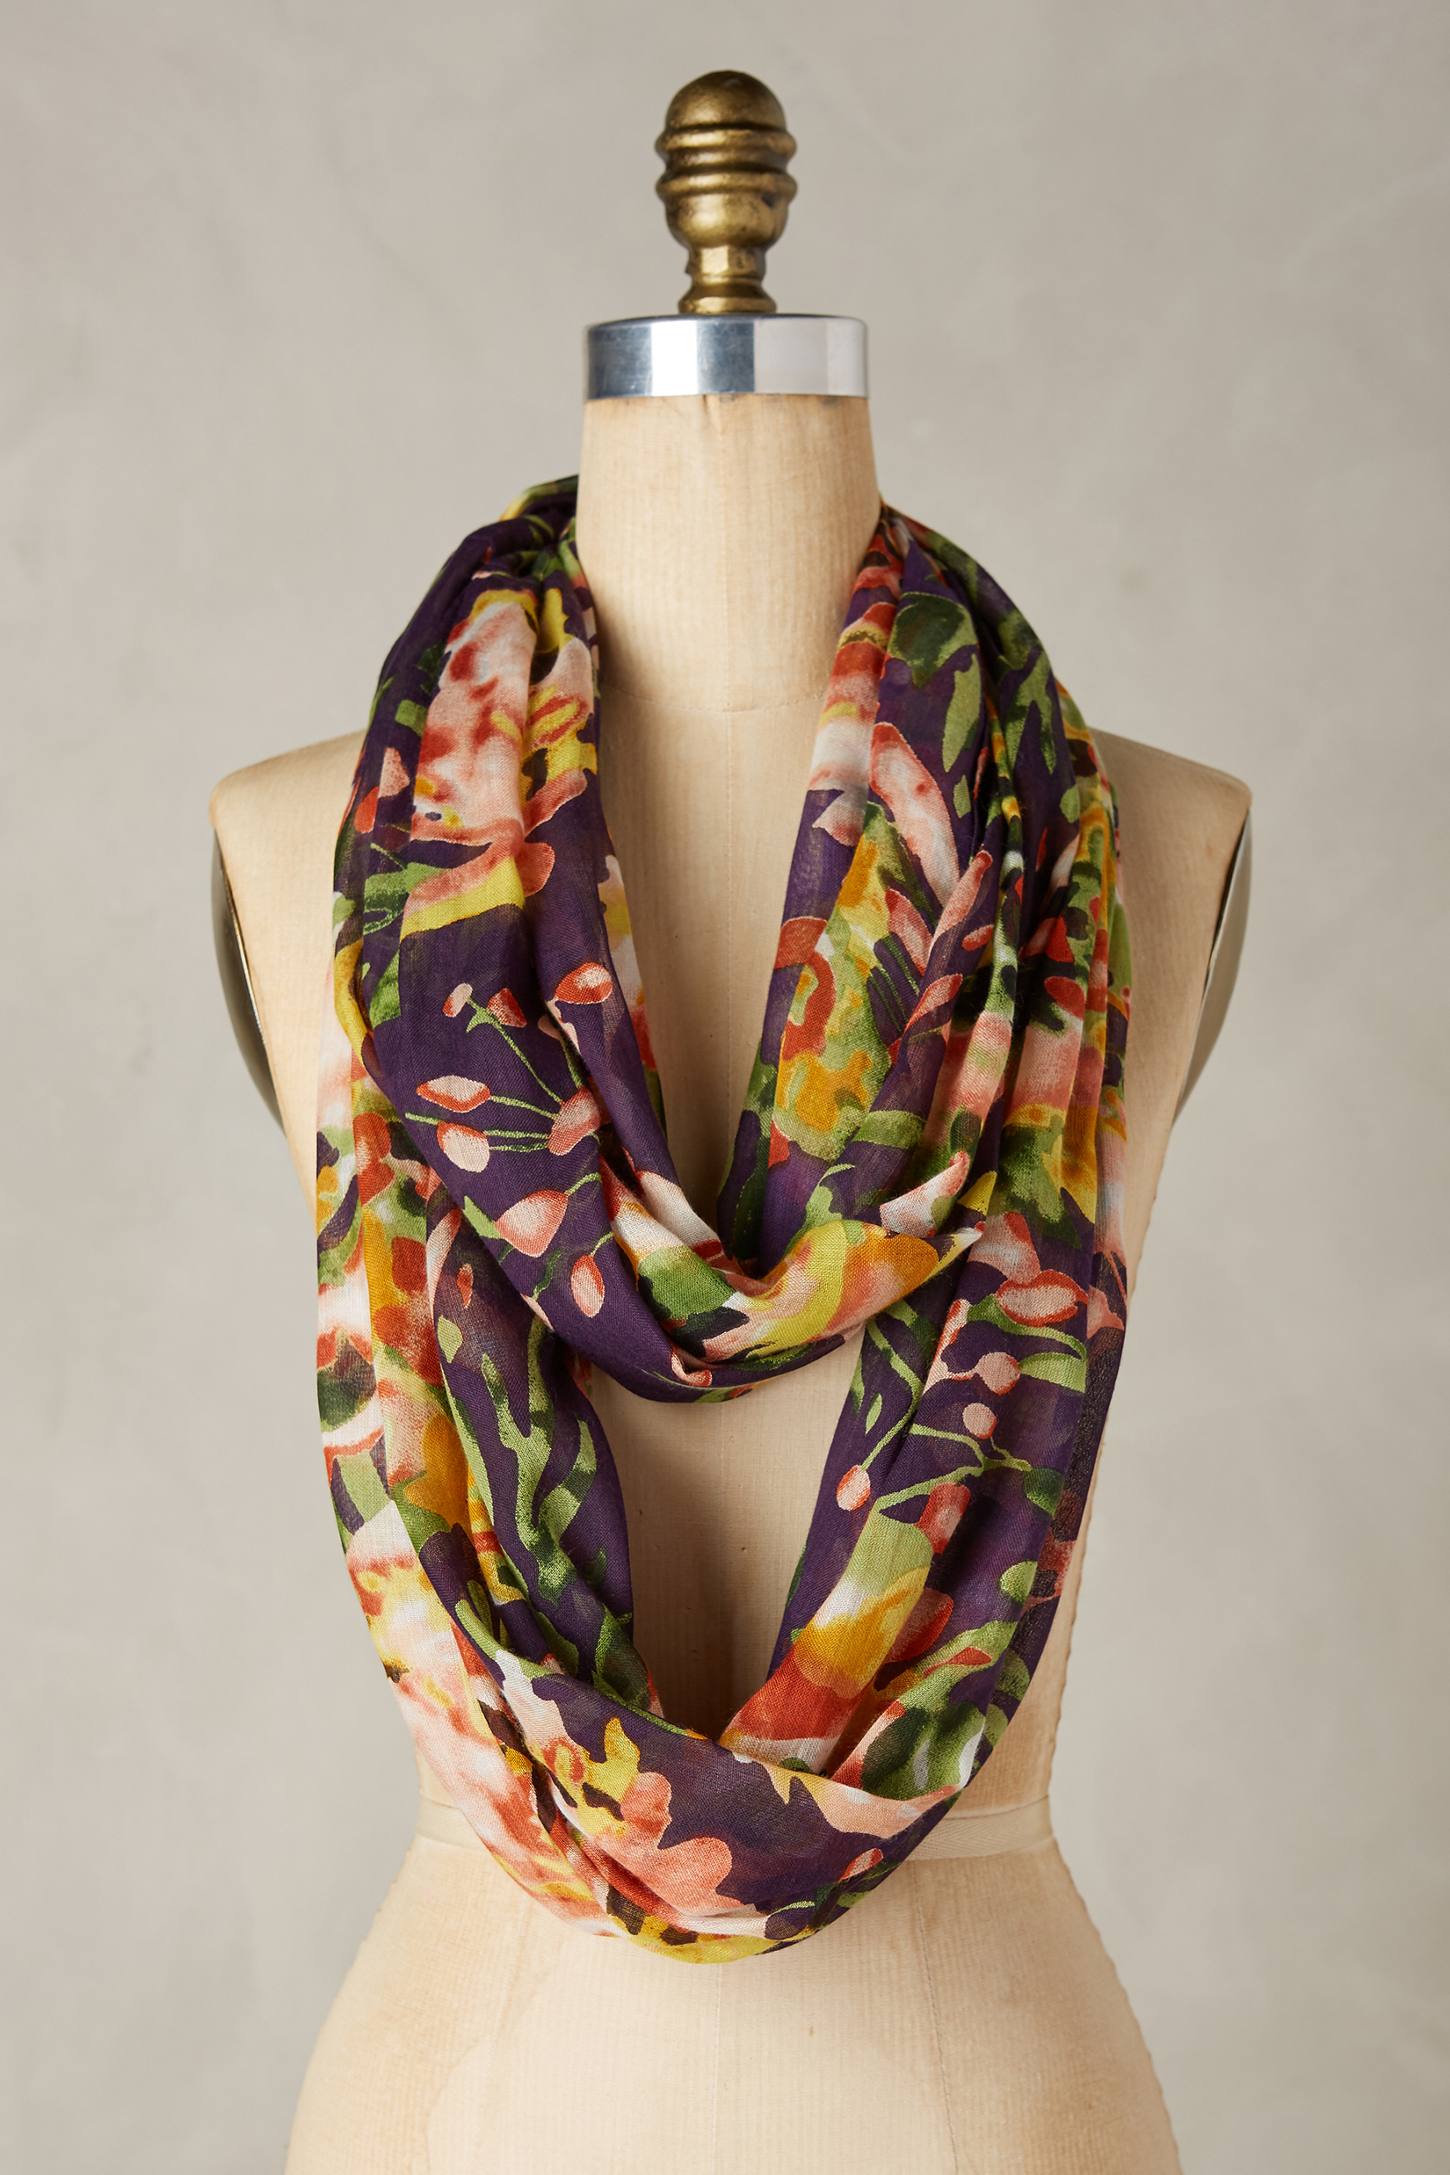 Floral Infinity Scarf from Anthropologie